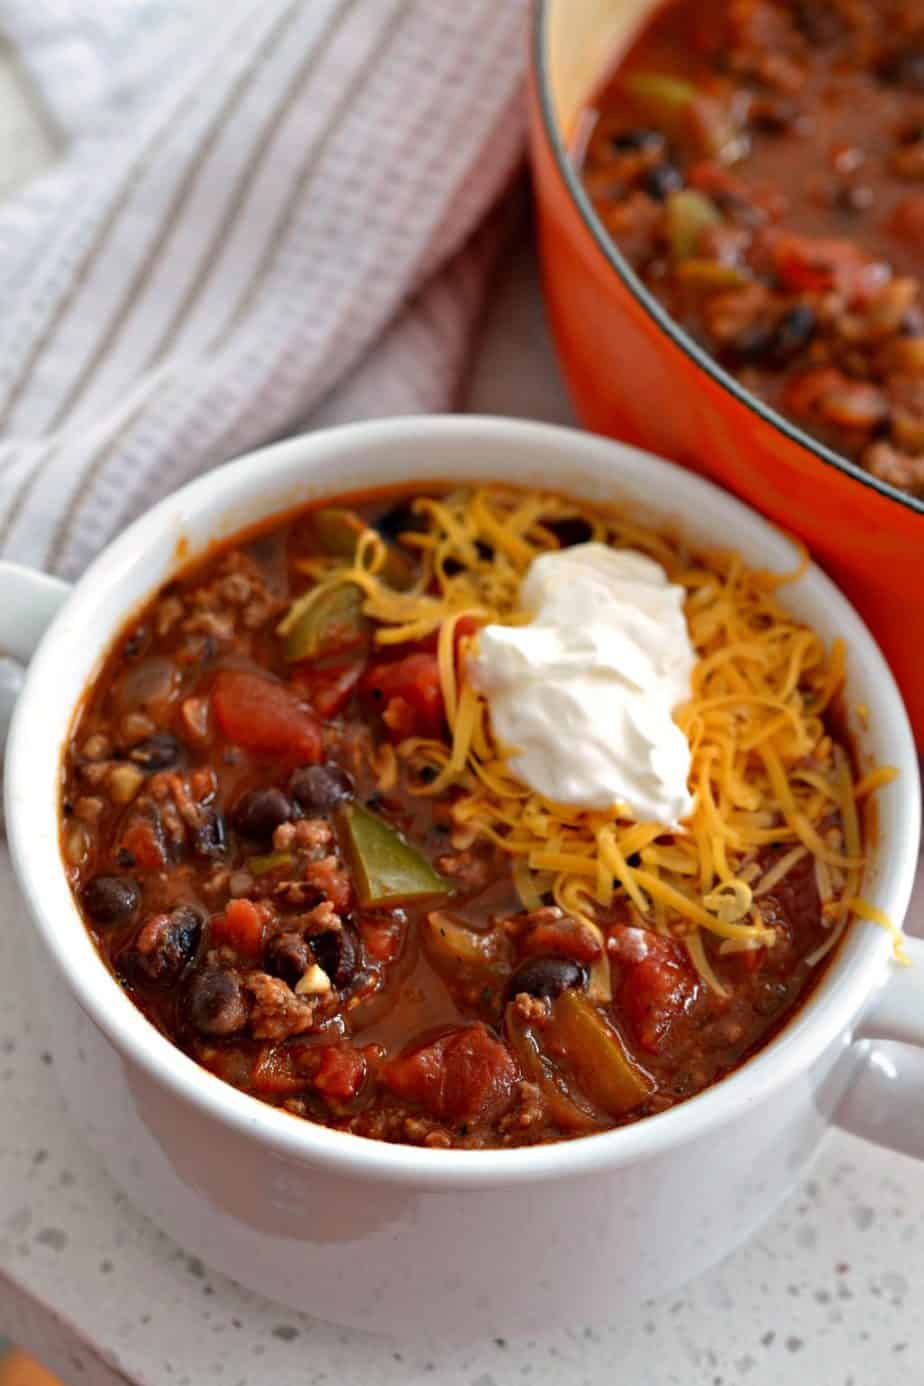 Thick Hearty Chili Recipe - Small Town Woman